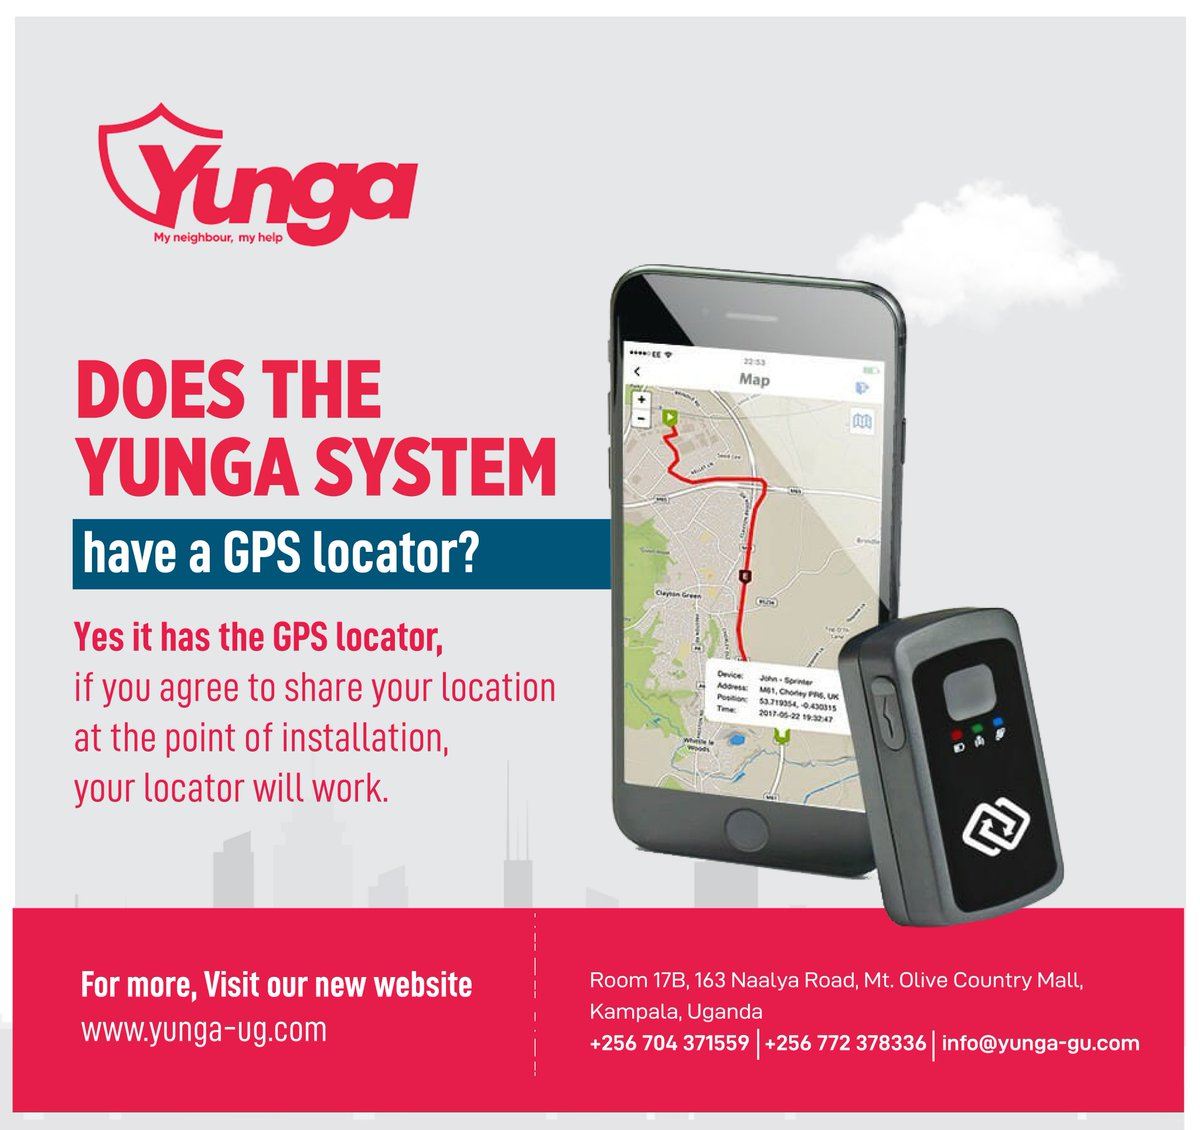 The Yunga GPS locator is just one of the features that will complement your security. It's benefits enable law enforcement to know exactly where to find your house in case on any attack. Yunga is here to help! You can check out more of our products today: yunga-ug.com